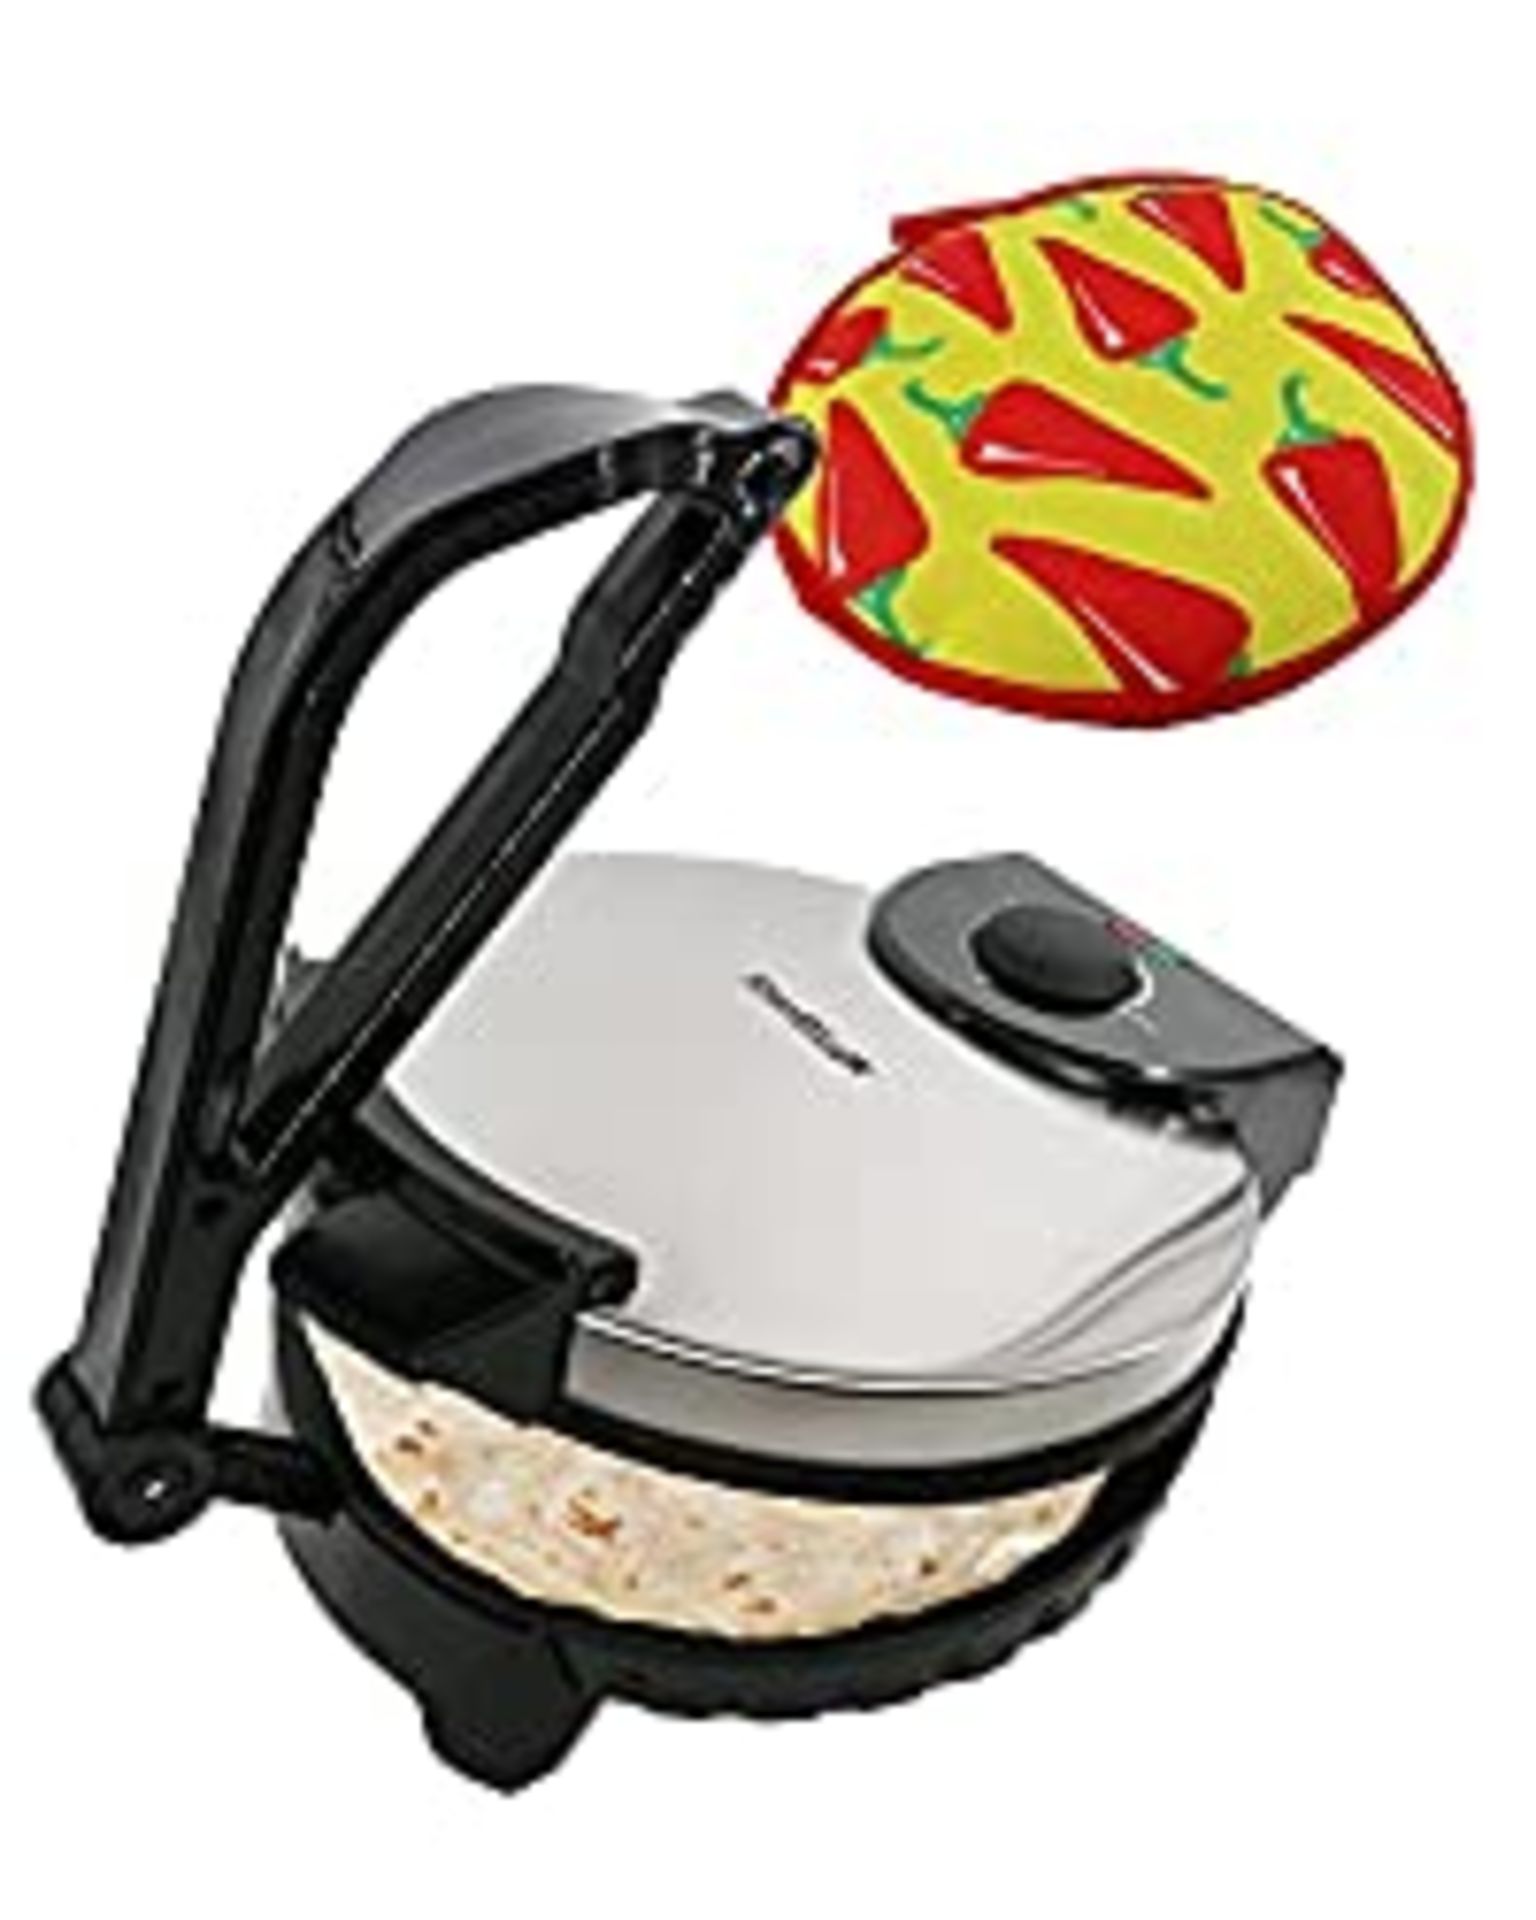 RRP £57.07 10inch Roti Maker by StarBlue with Free Roti Warmer